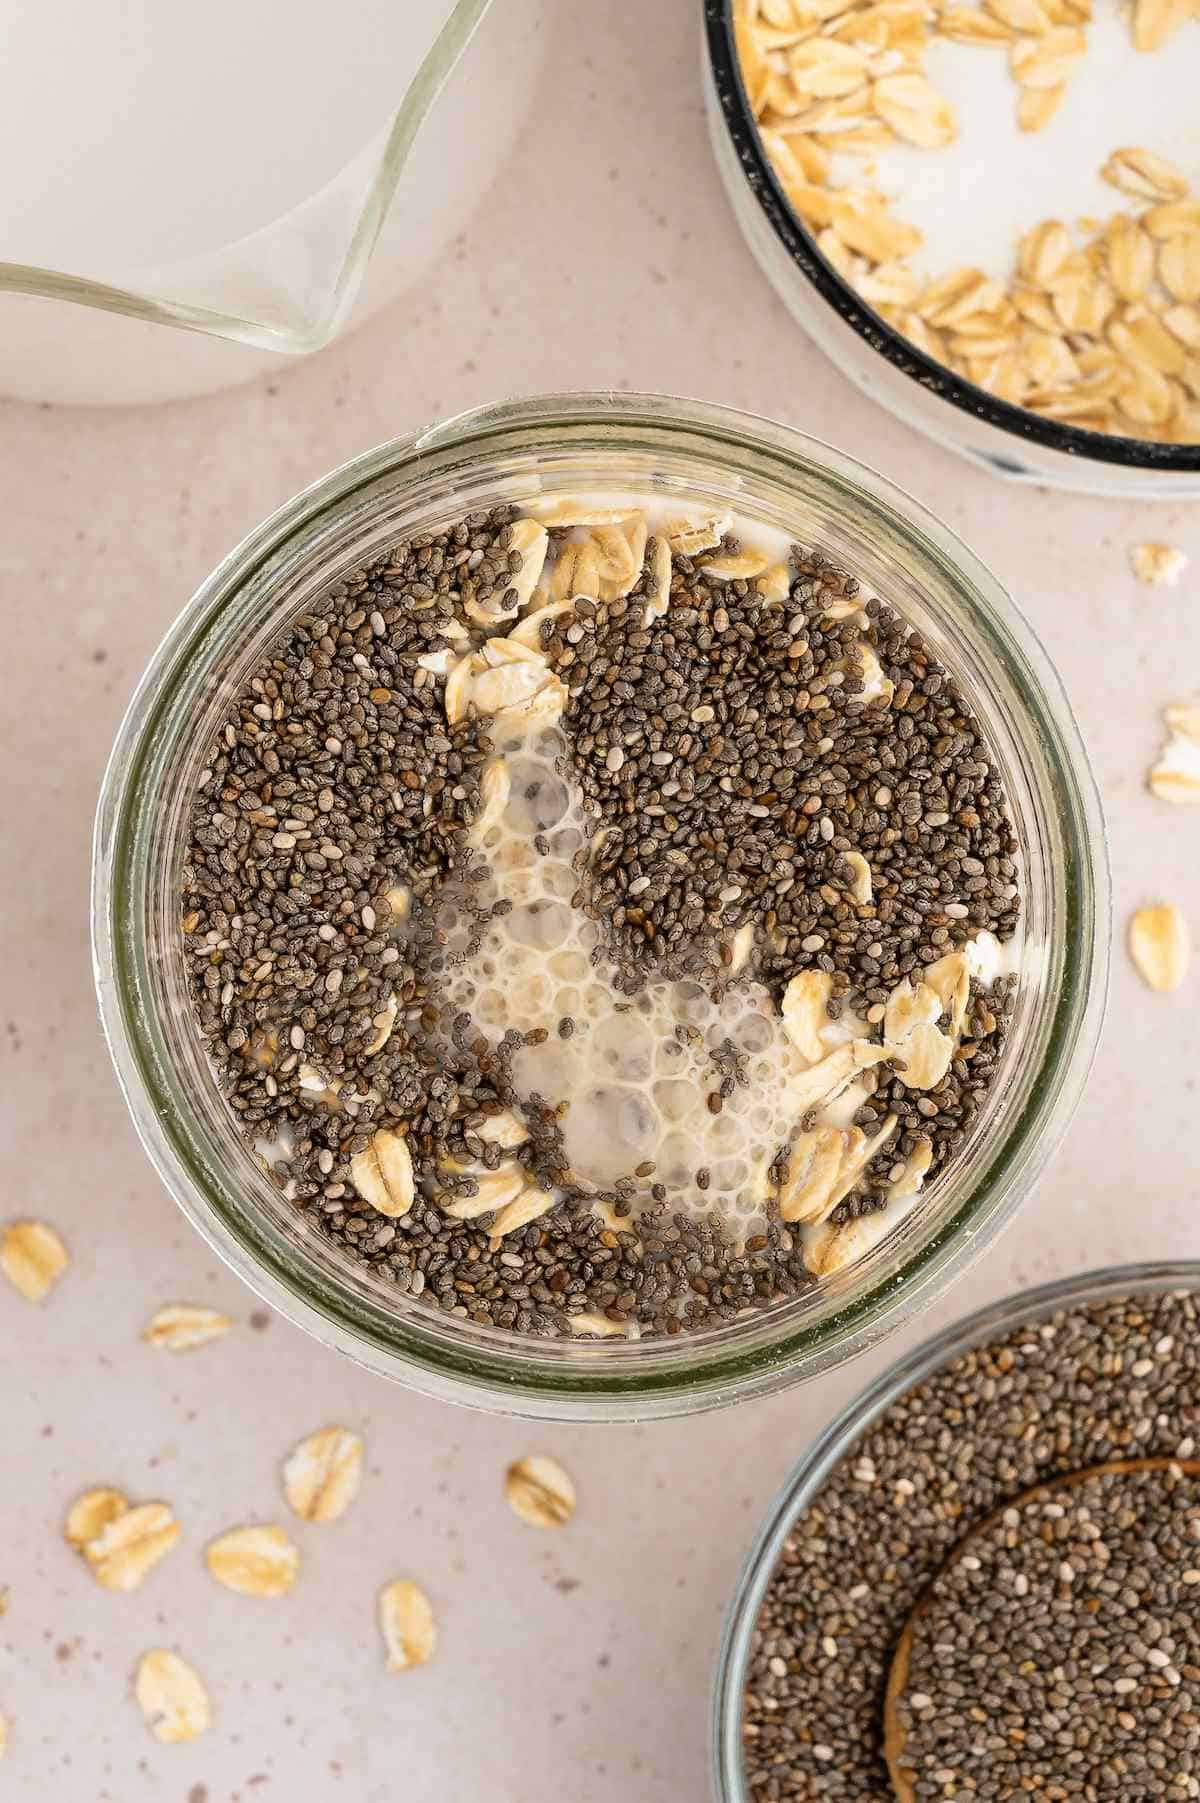 Ingredients for overnight oats added to a glass jar.